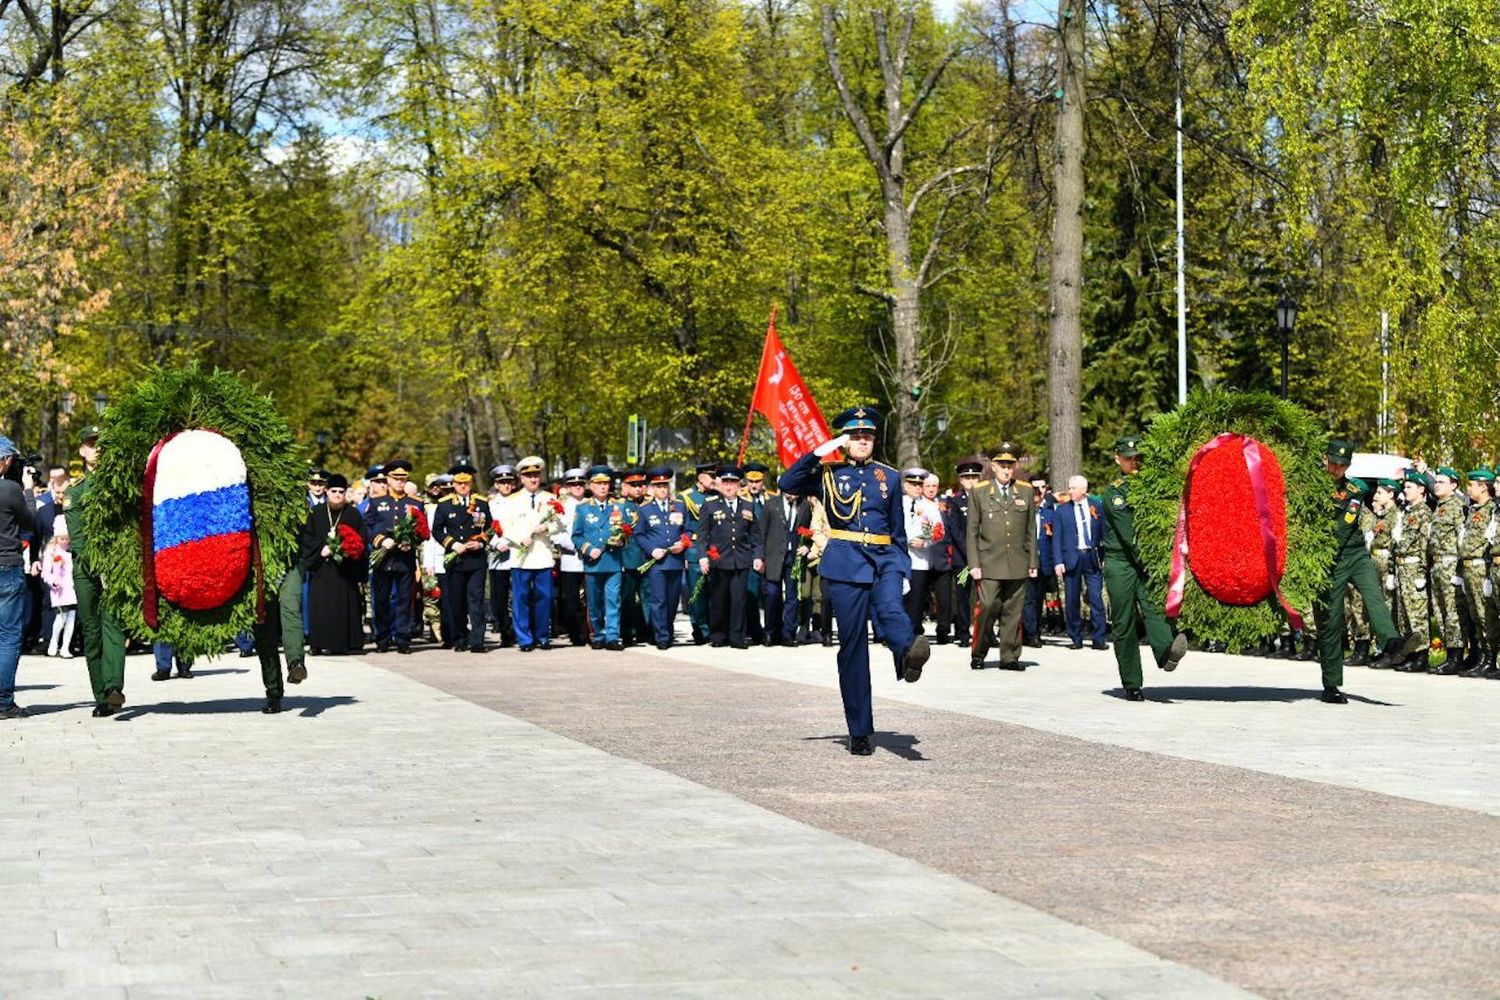 A parade of military equipment took place in Yaroslavl